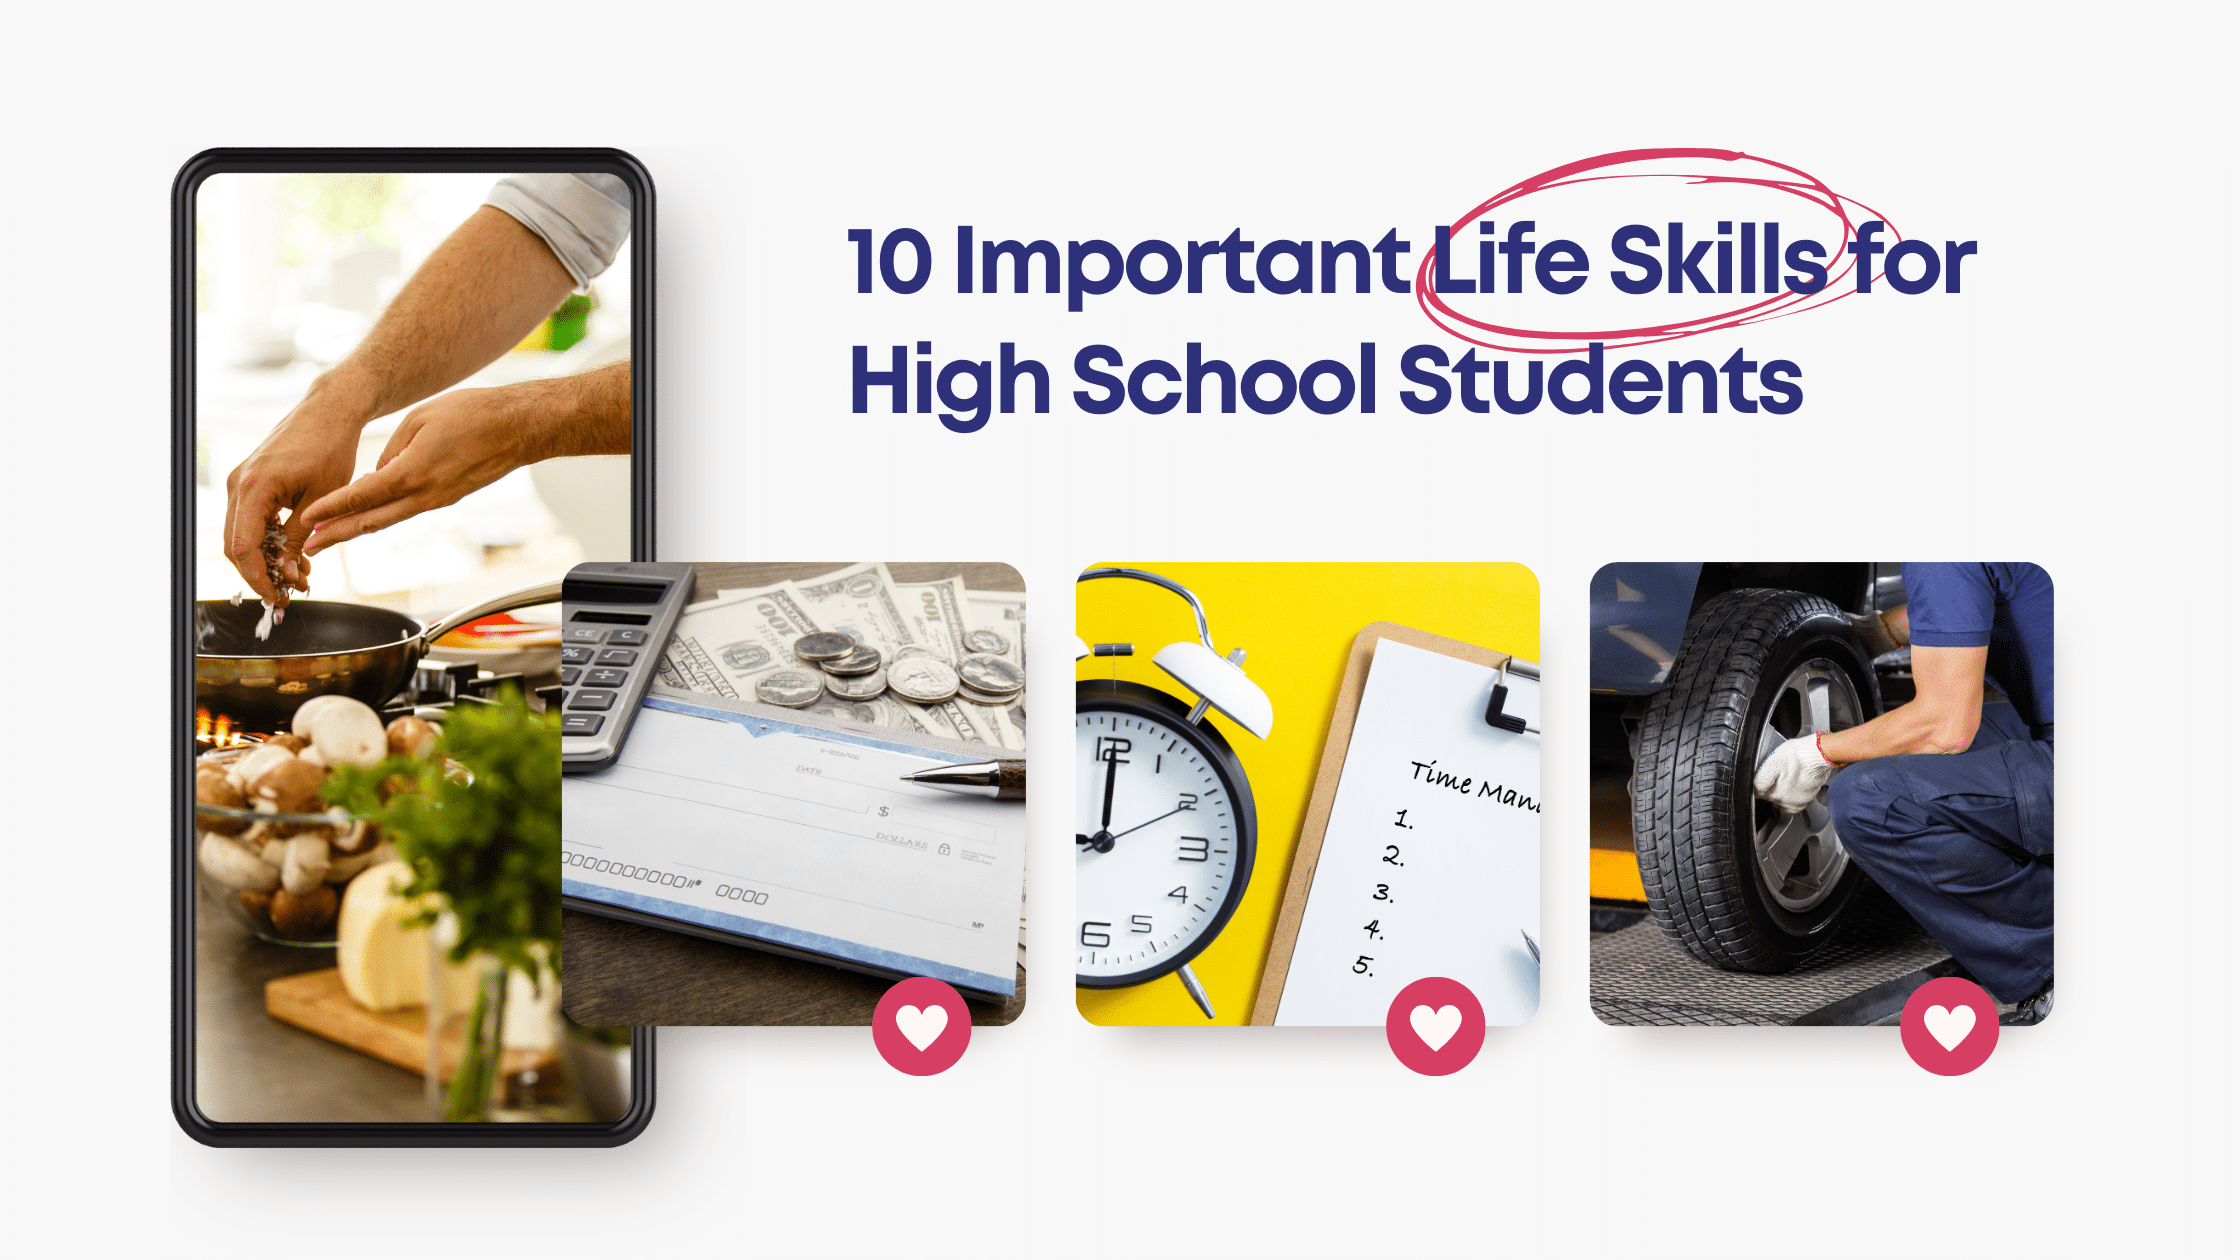 10 Important Life Skills for High School Students